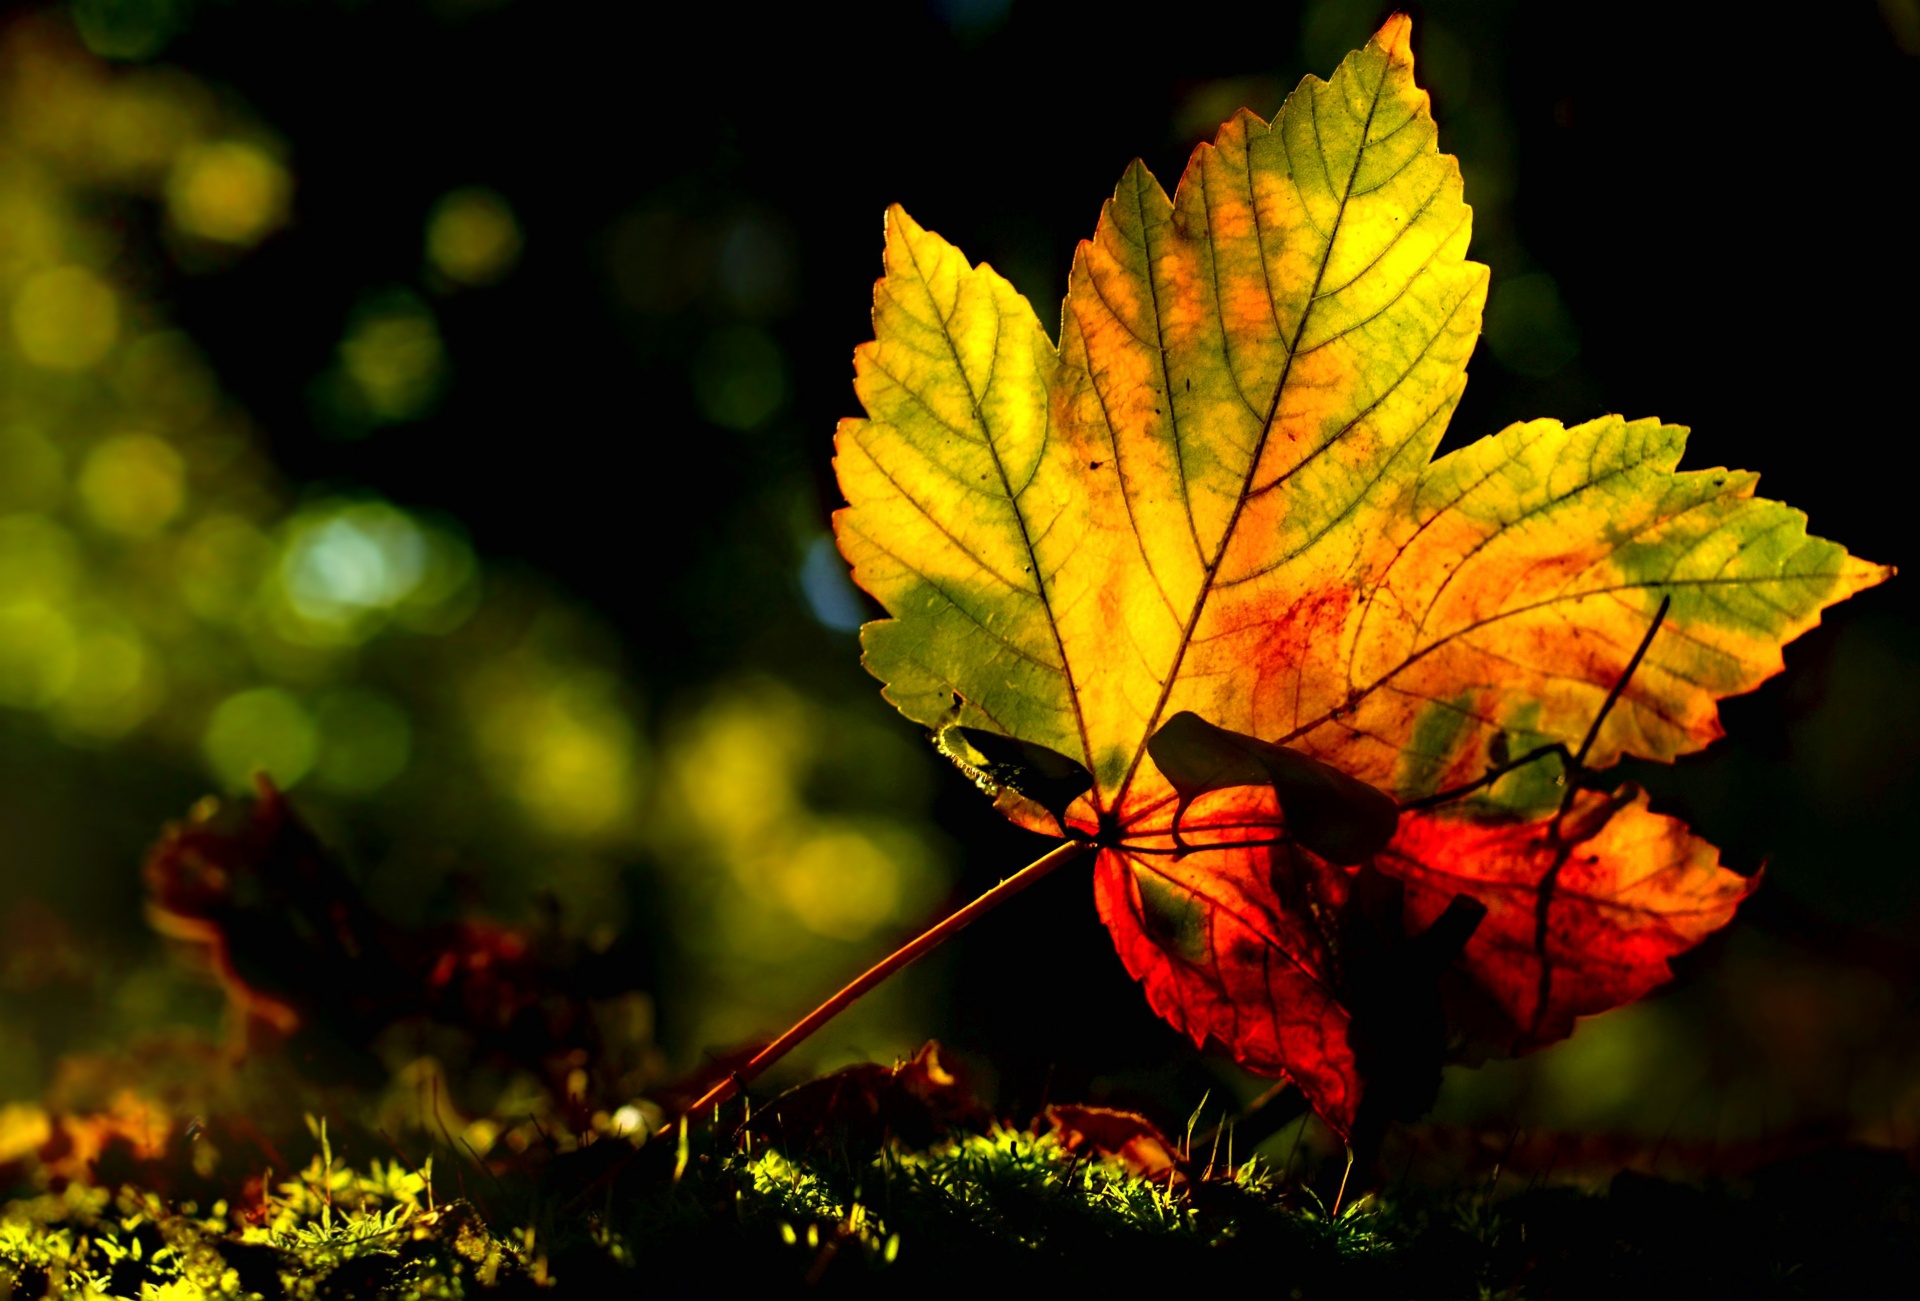 Maple leaf foliage autumn trees tree autumnal background wallpaper colors colorful orange red green yellow forest season light shine fallen fall leaves moss macro photography